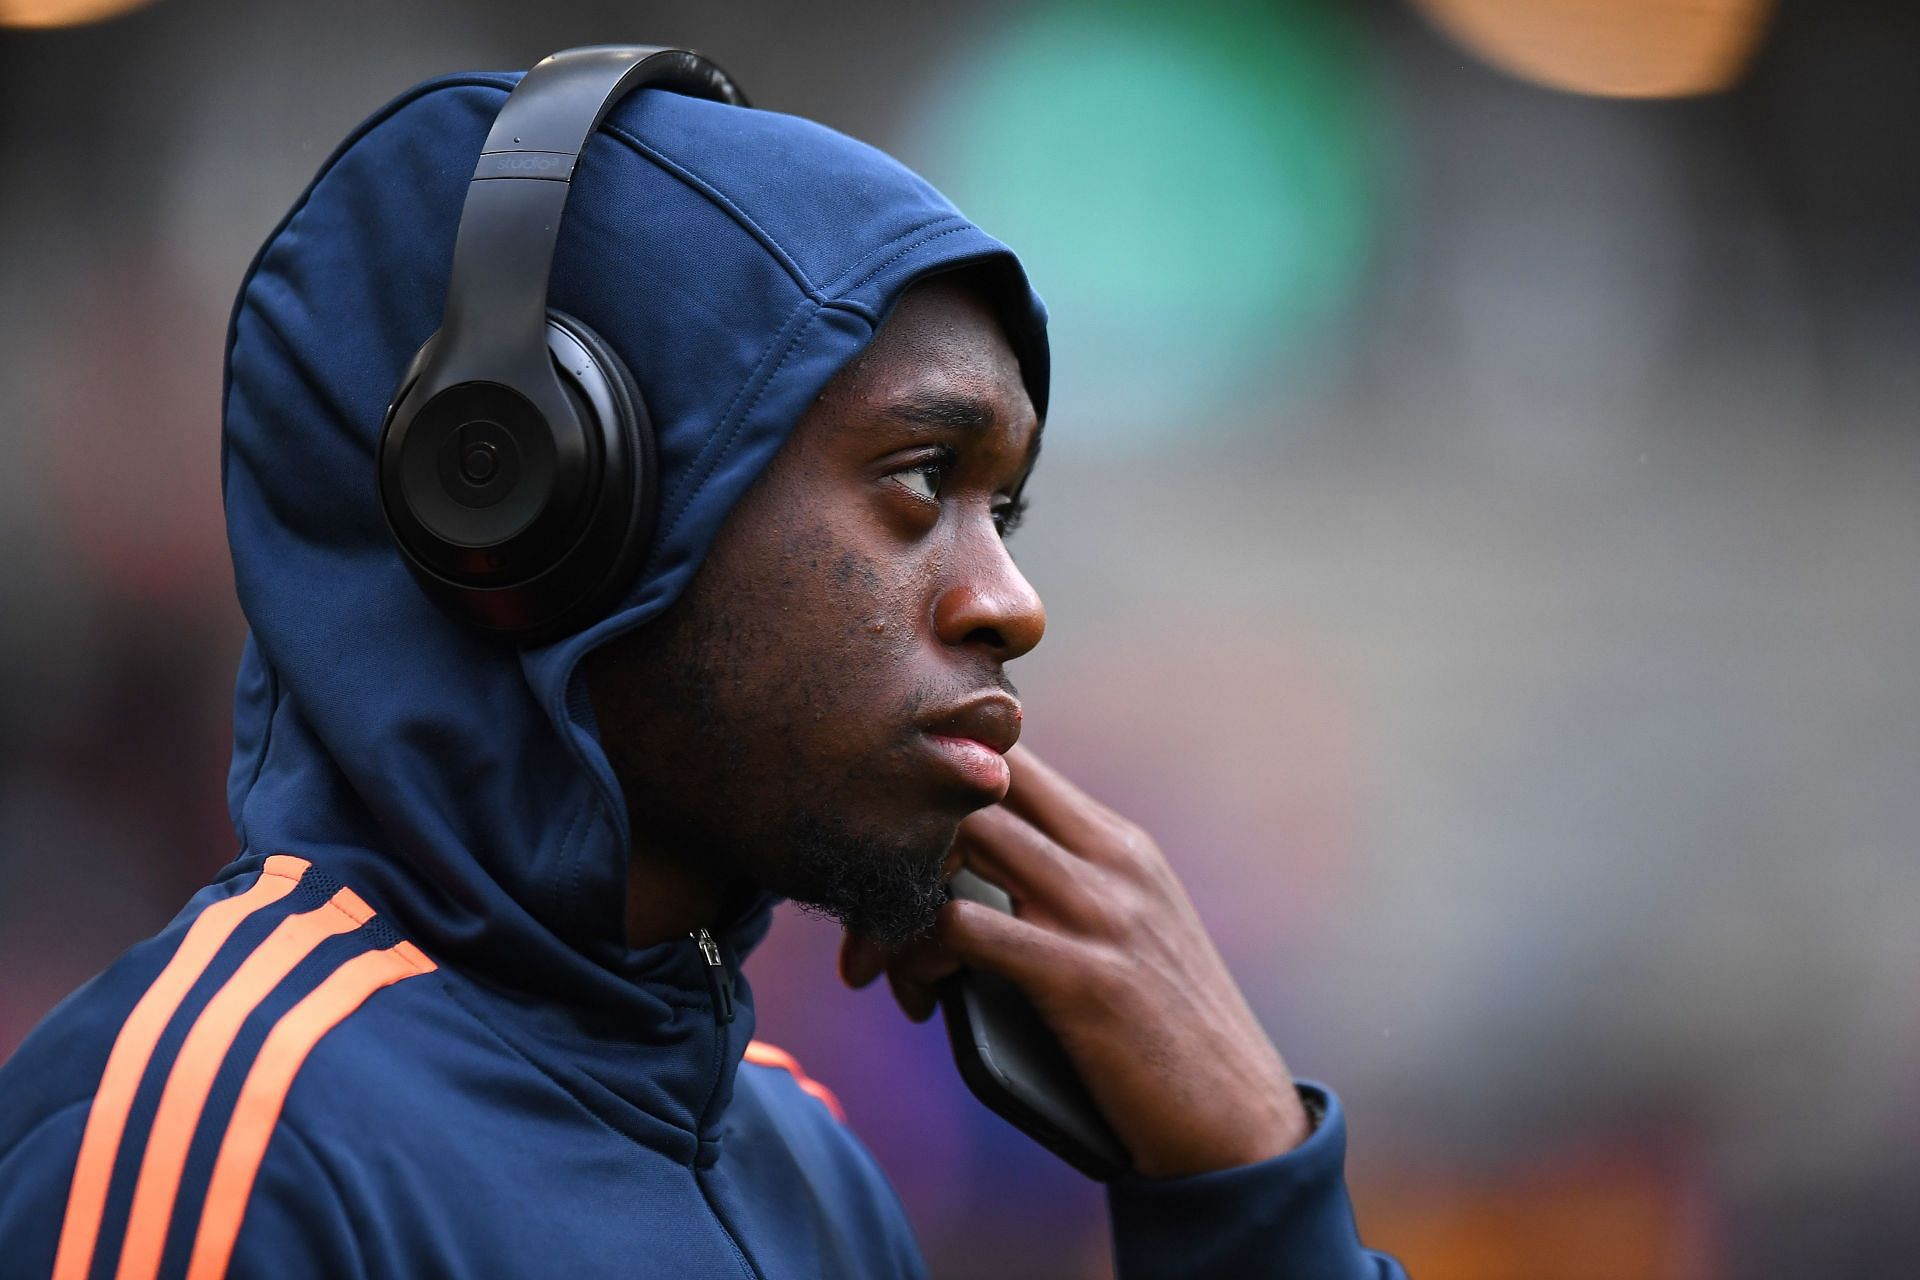 Manchester United could sell Wan-Bissaka.